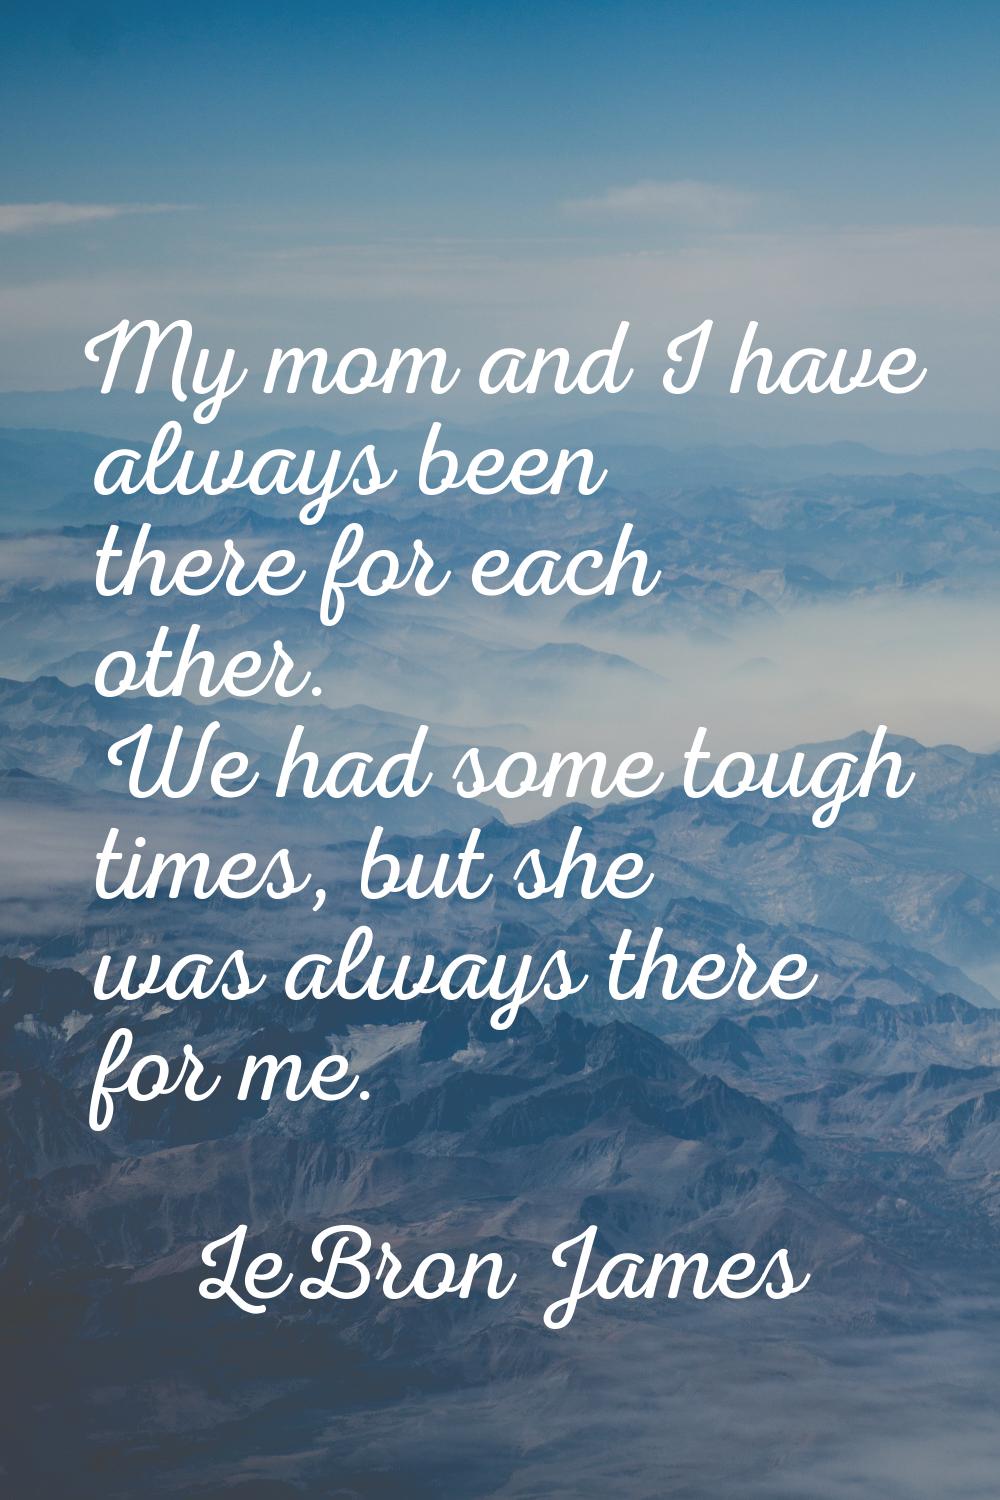 My mom and I have always been there for each other. We had some tough times, but she was always the